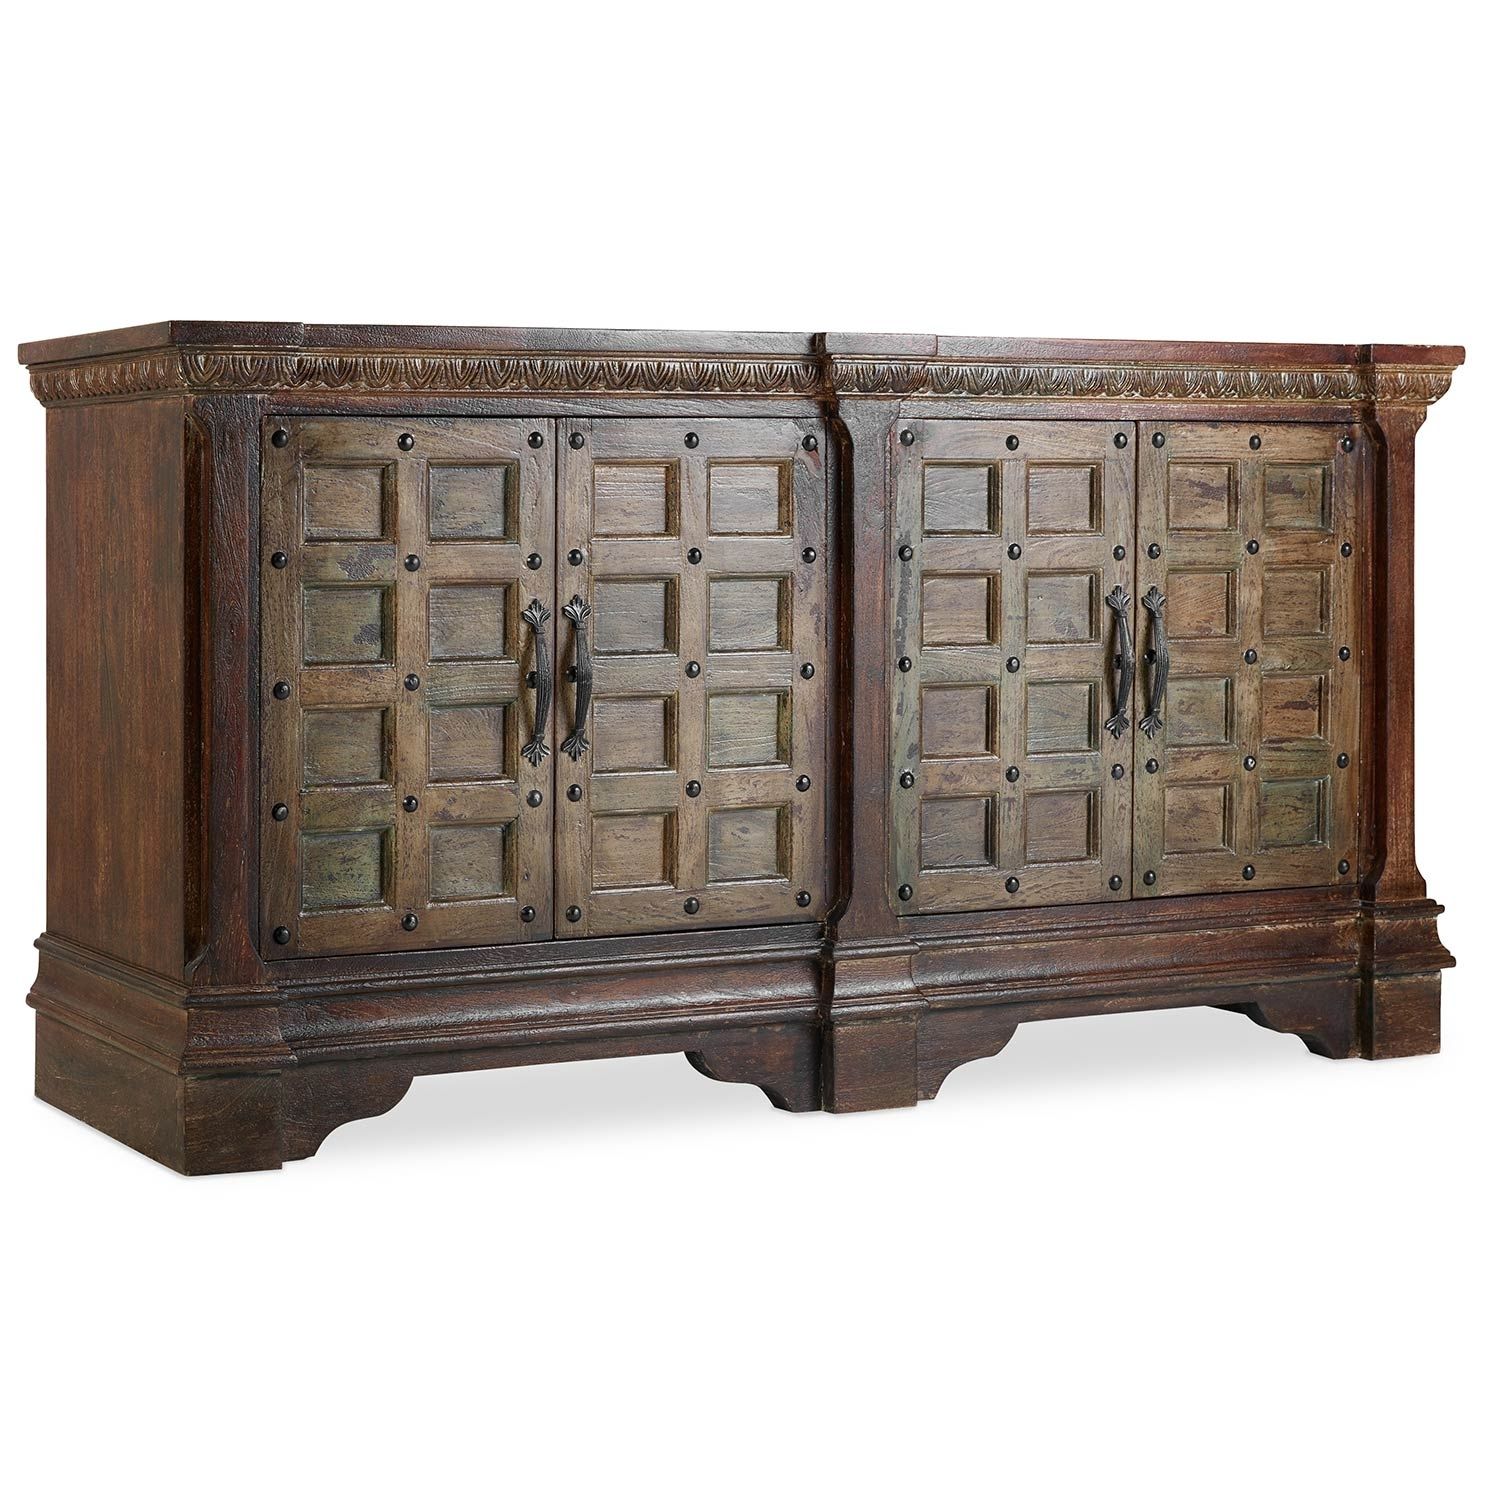 Hooker Furniture Entertainment Console 72 Inch 5516 55476 Dkw | Bellacor In Brown Wood 72 Inch Sideboards (View 22 of 30)